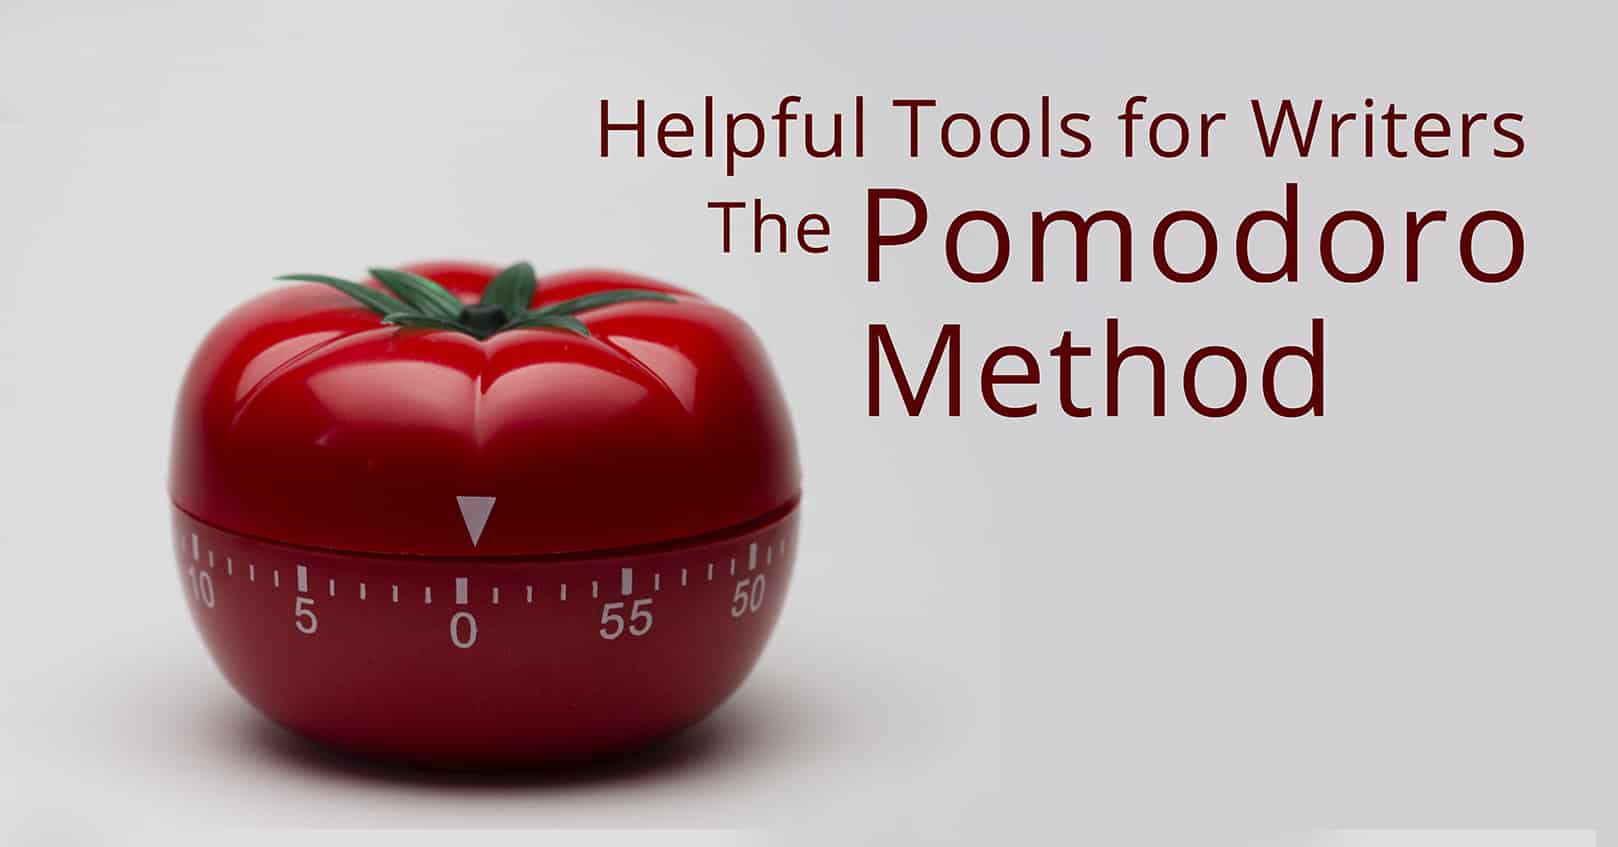 Tools for writers: the Pomodoro Method